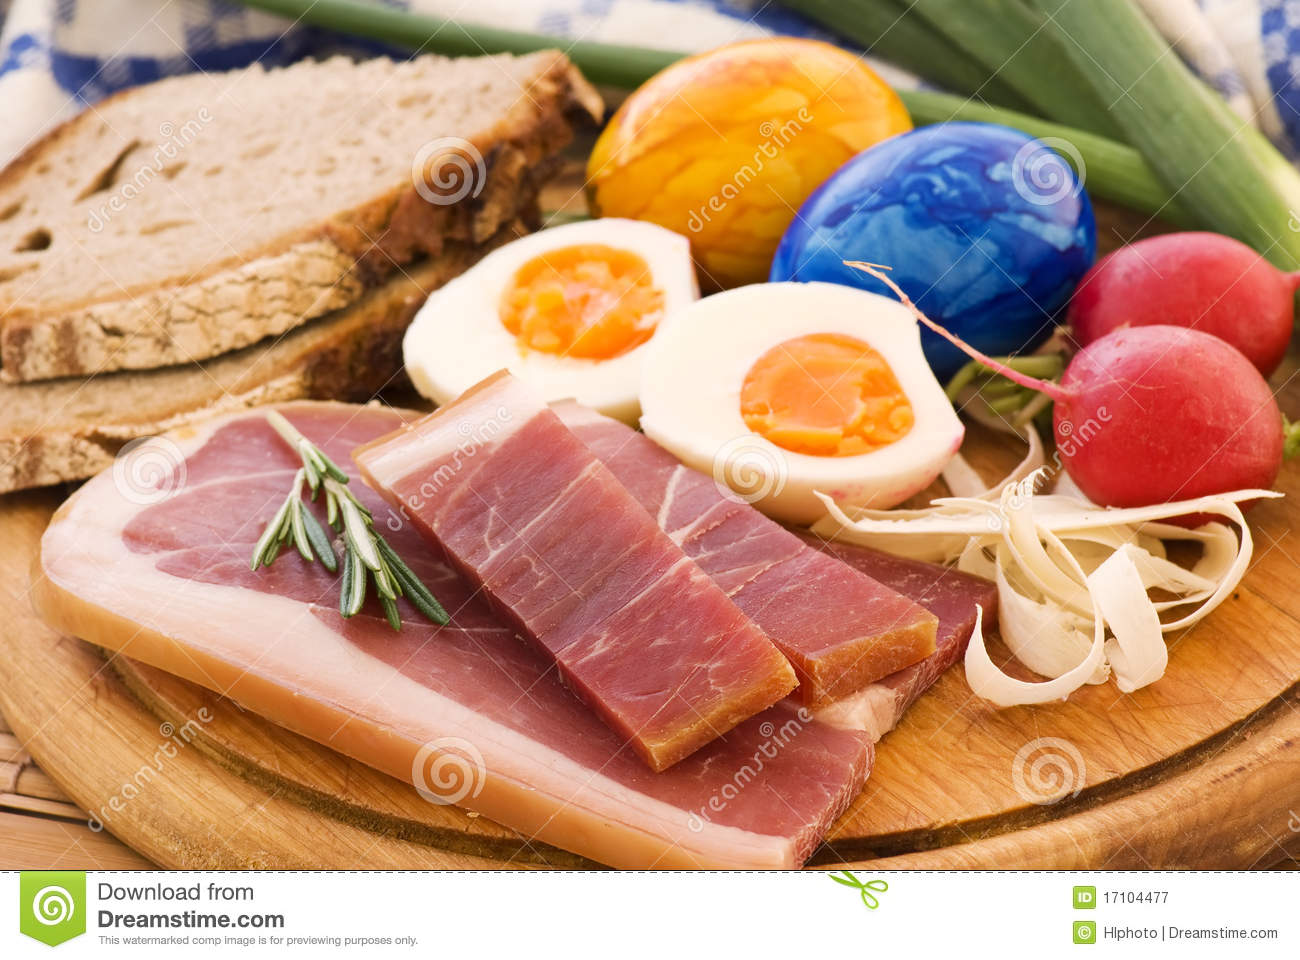 Easter Breakfast Royalty Free Stock Photography   Image  17104477